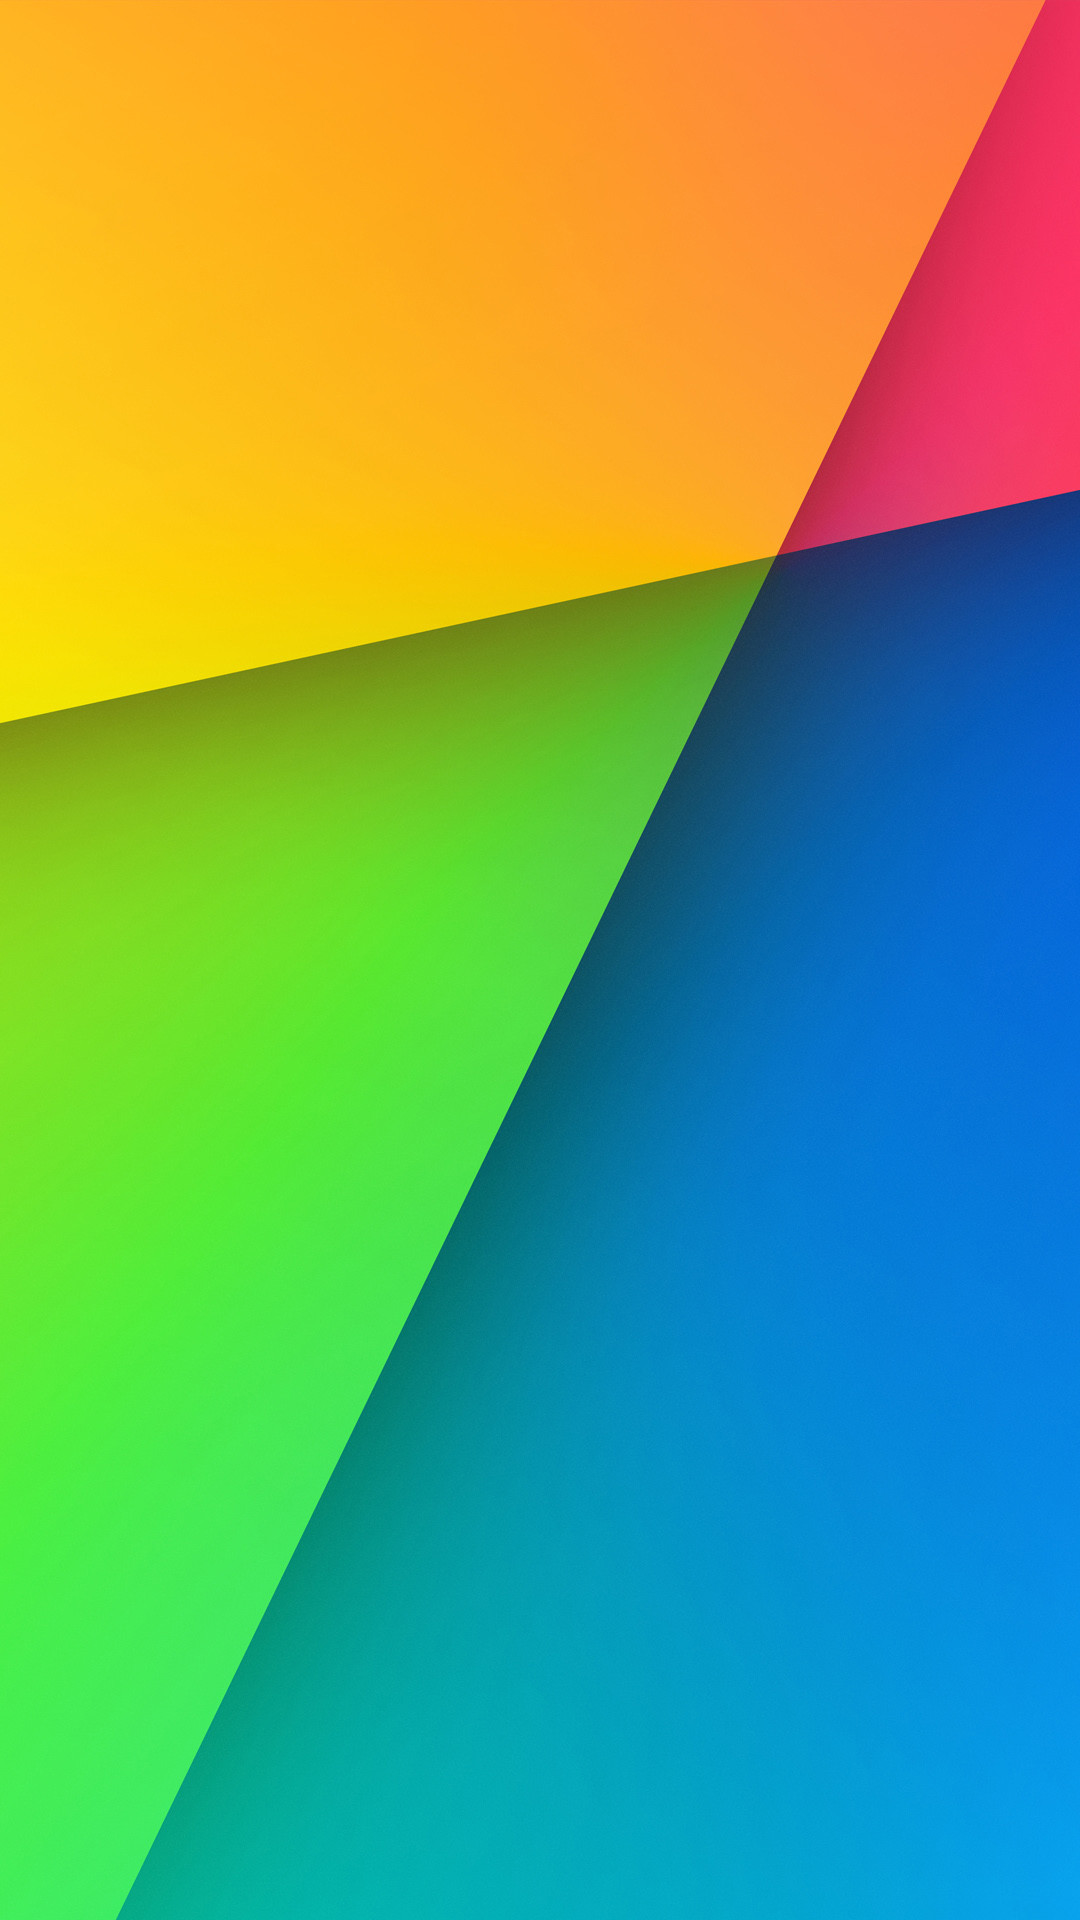 1080x1920 Nexus 7 Official HD Wallpaper Android Wallpaper free download